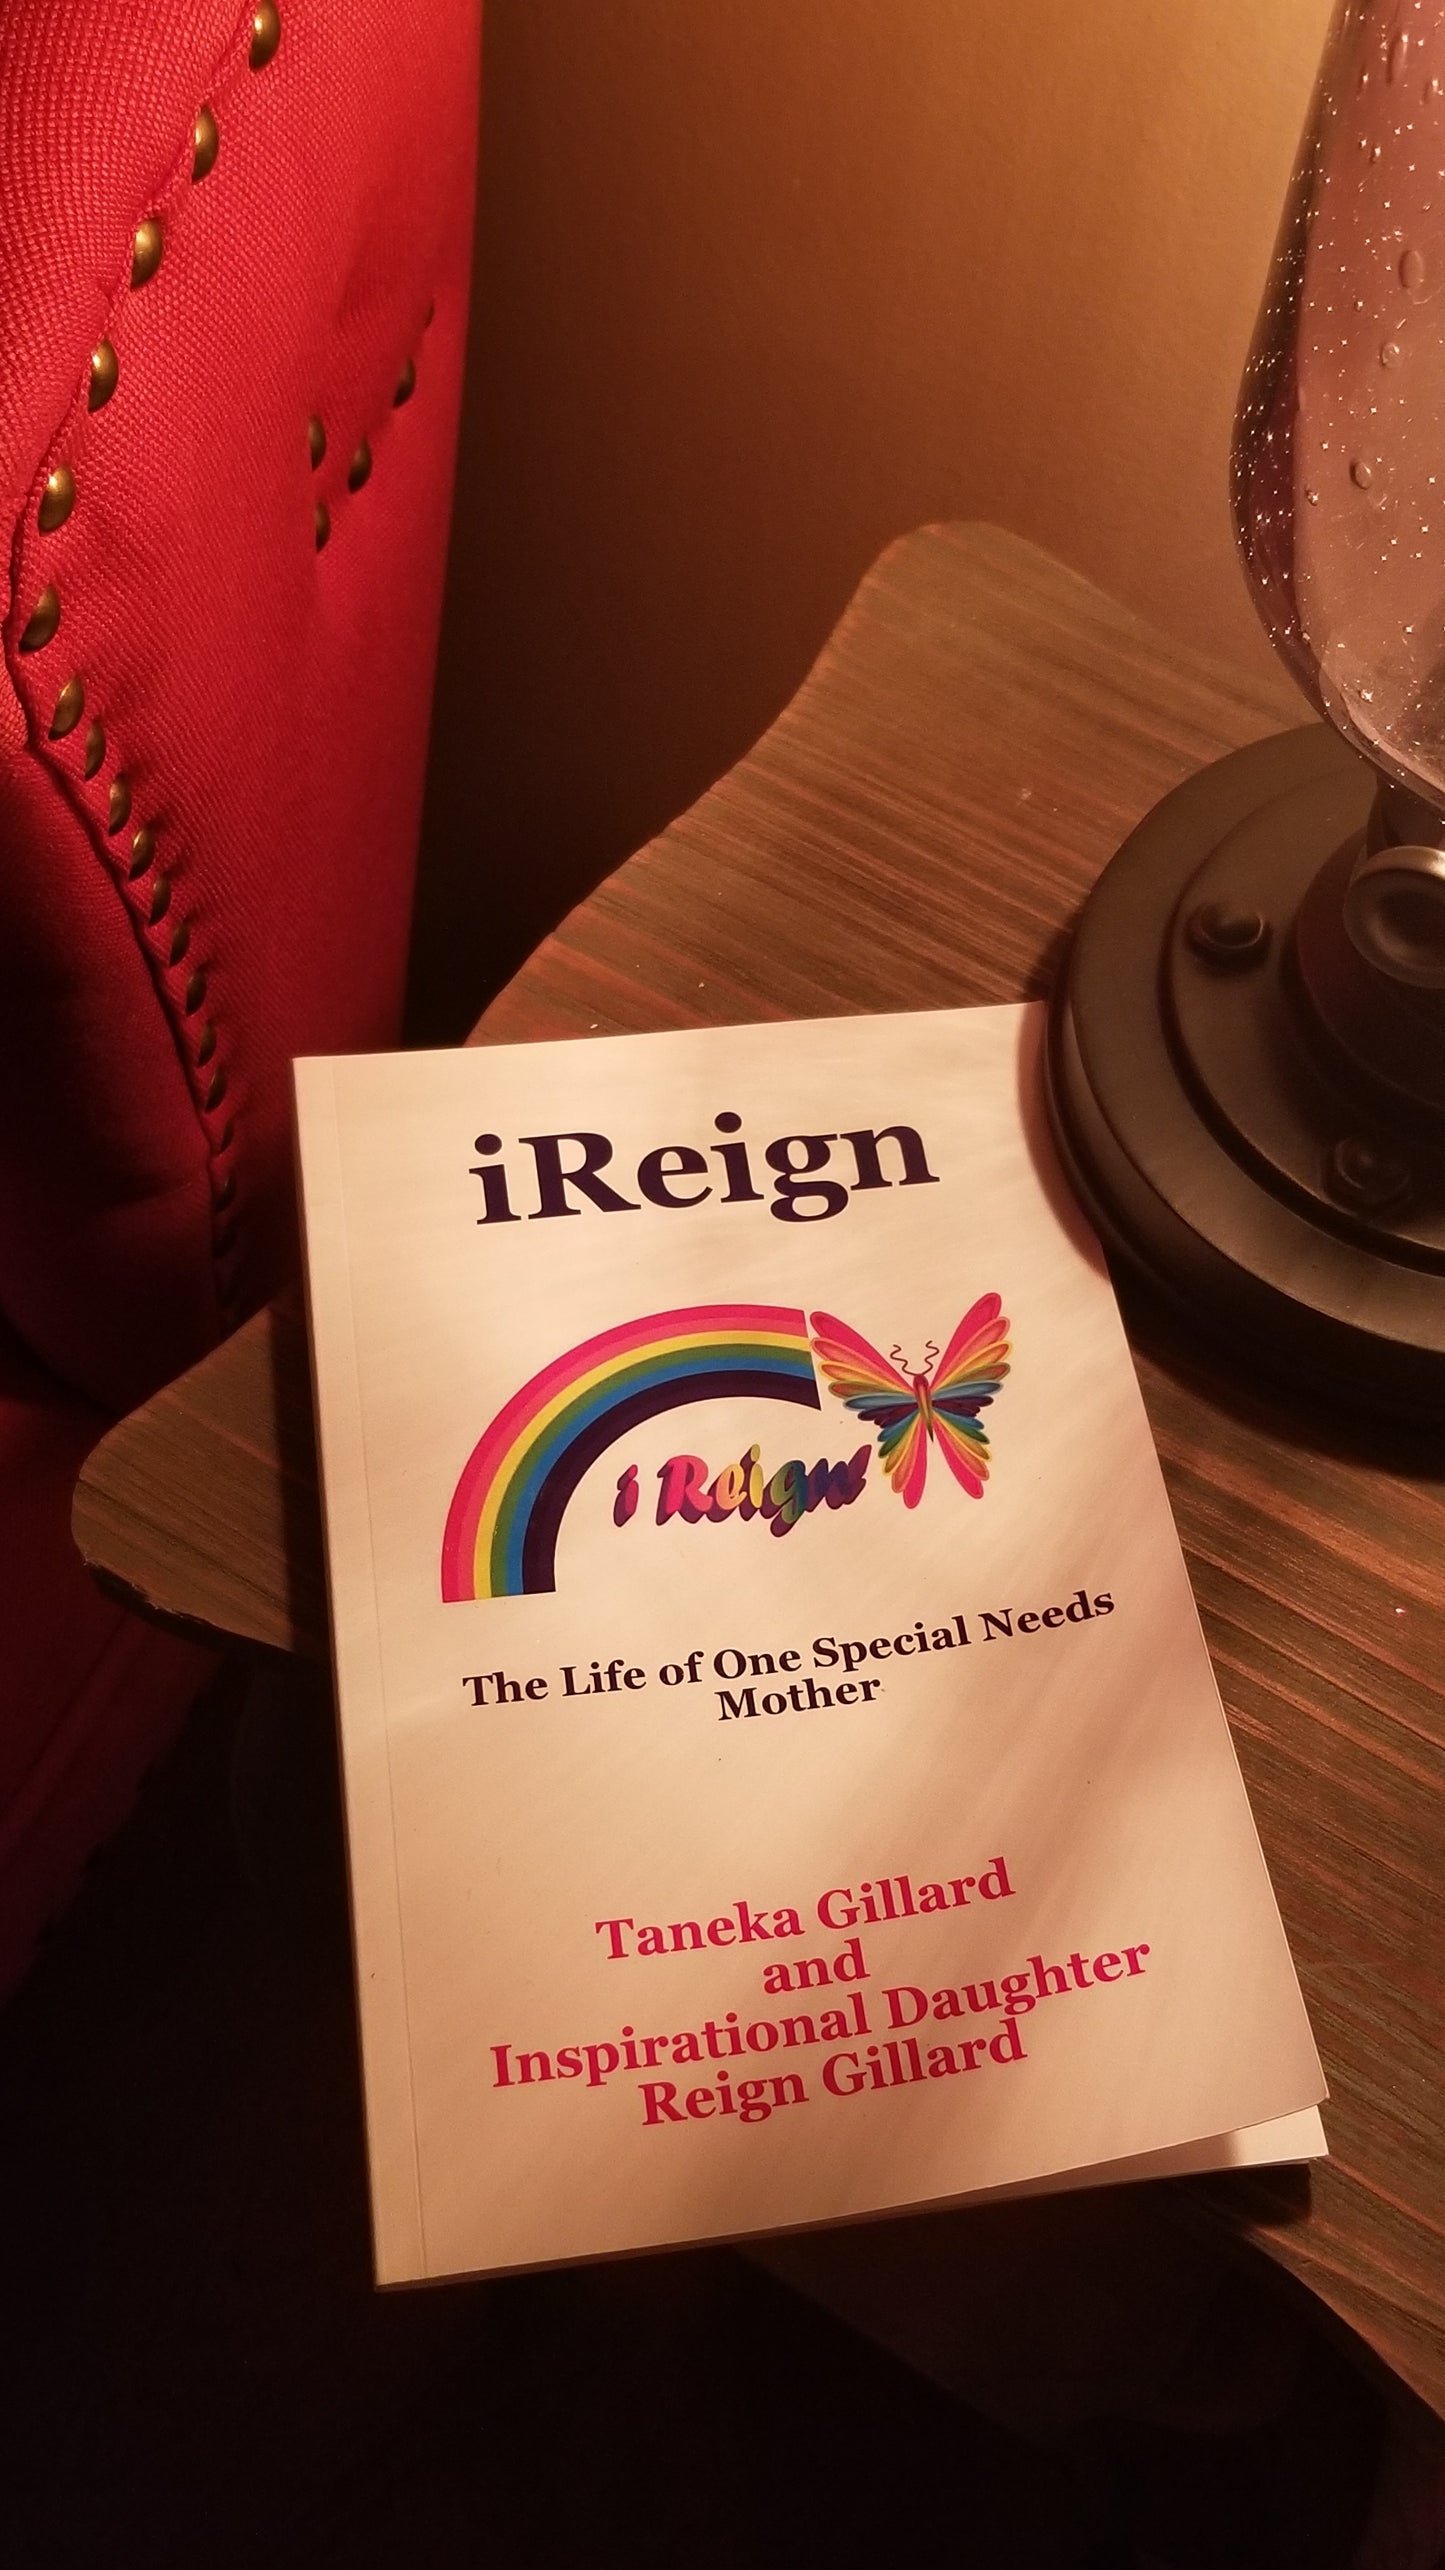 "iReign" The Life of One Special Needs Mother